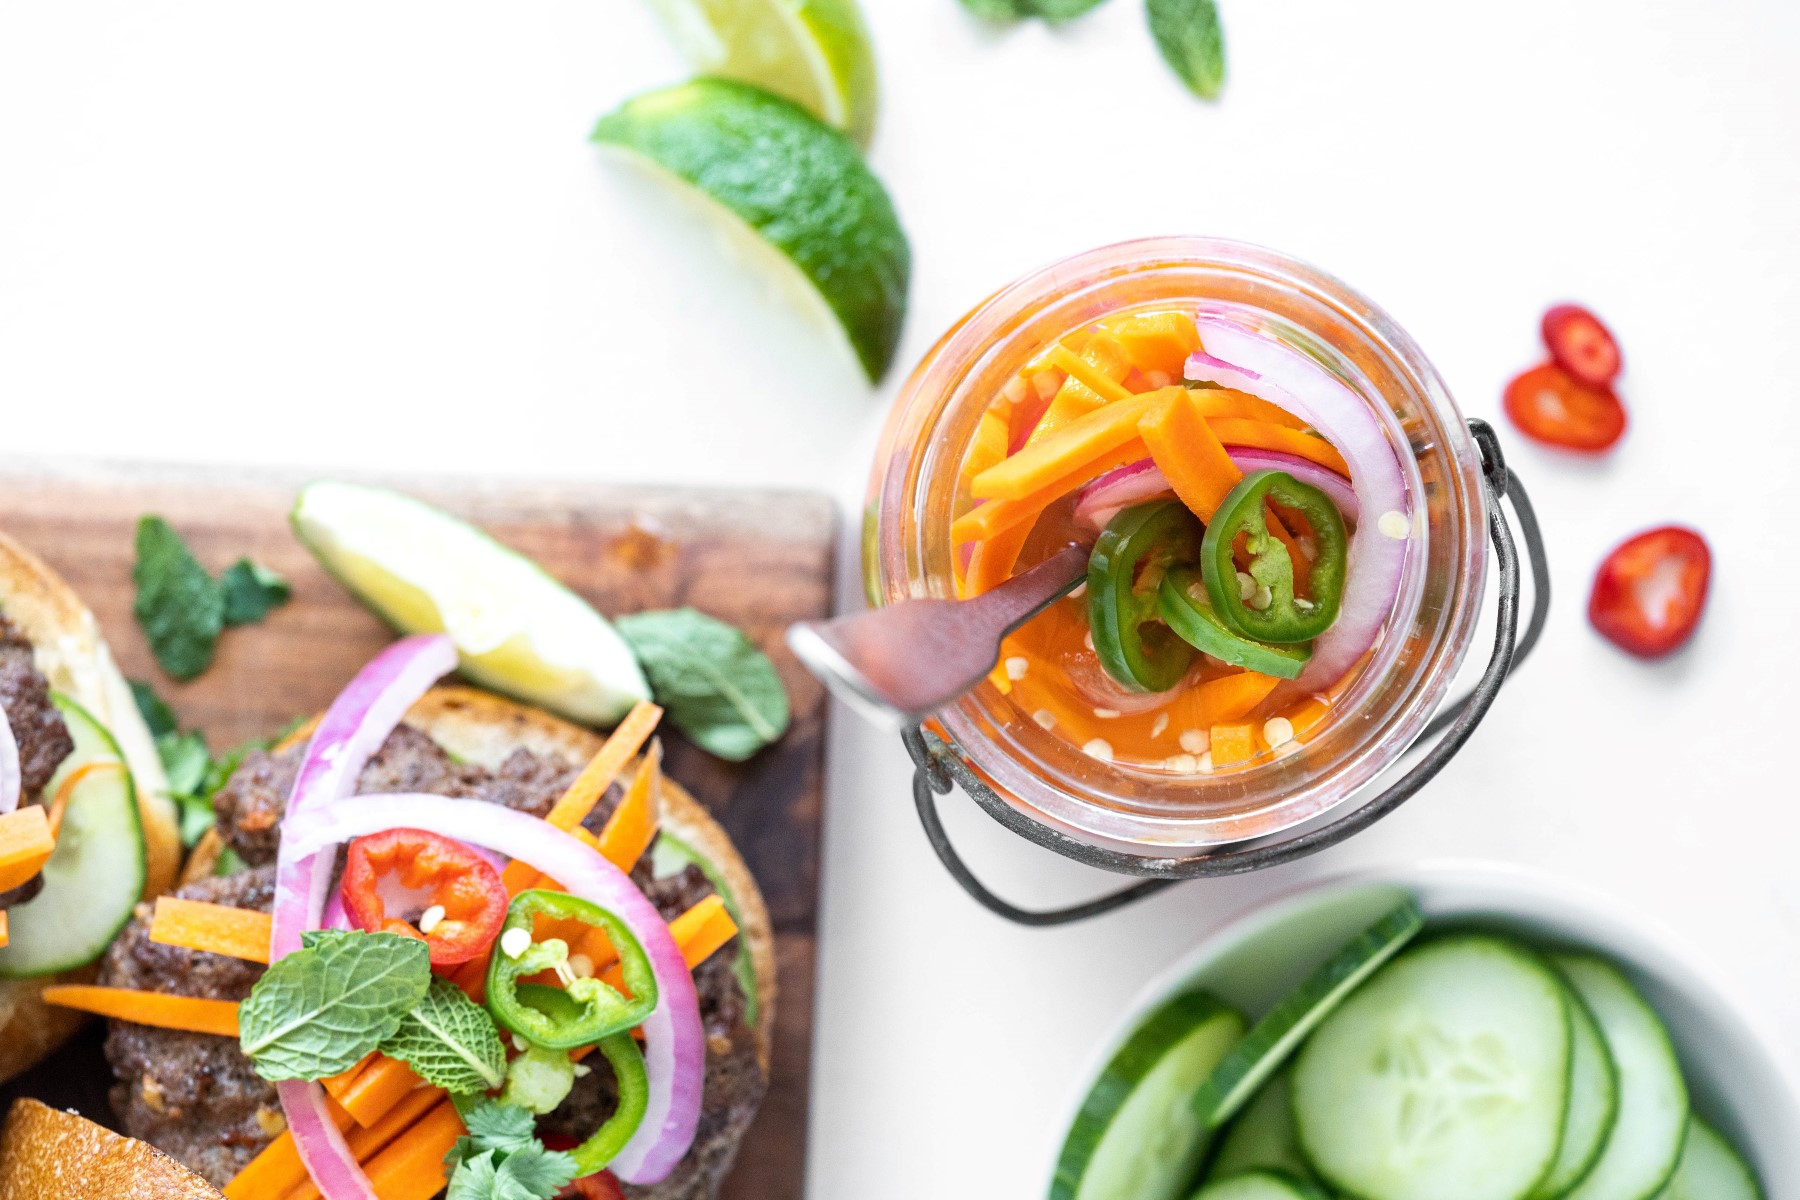 Quick pickled vegetables in a sealable glass jar beside a burger topped with pickled veggies.